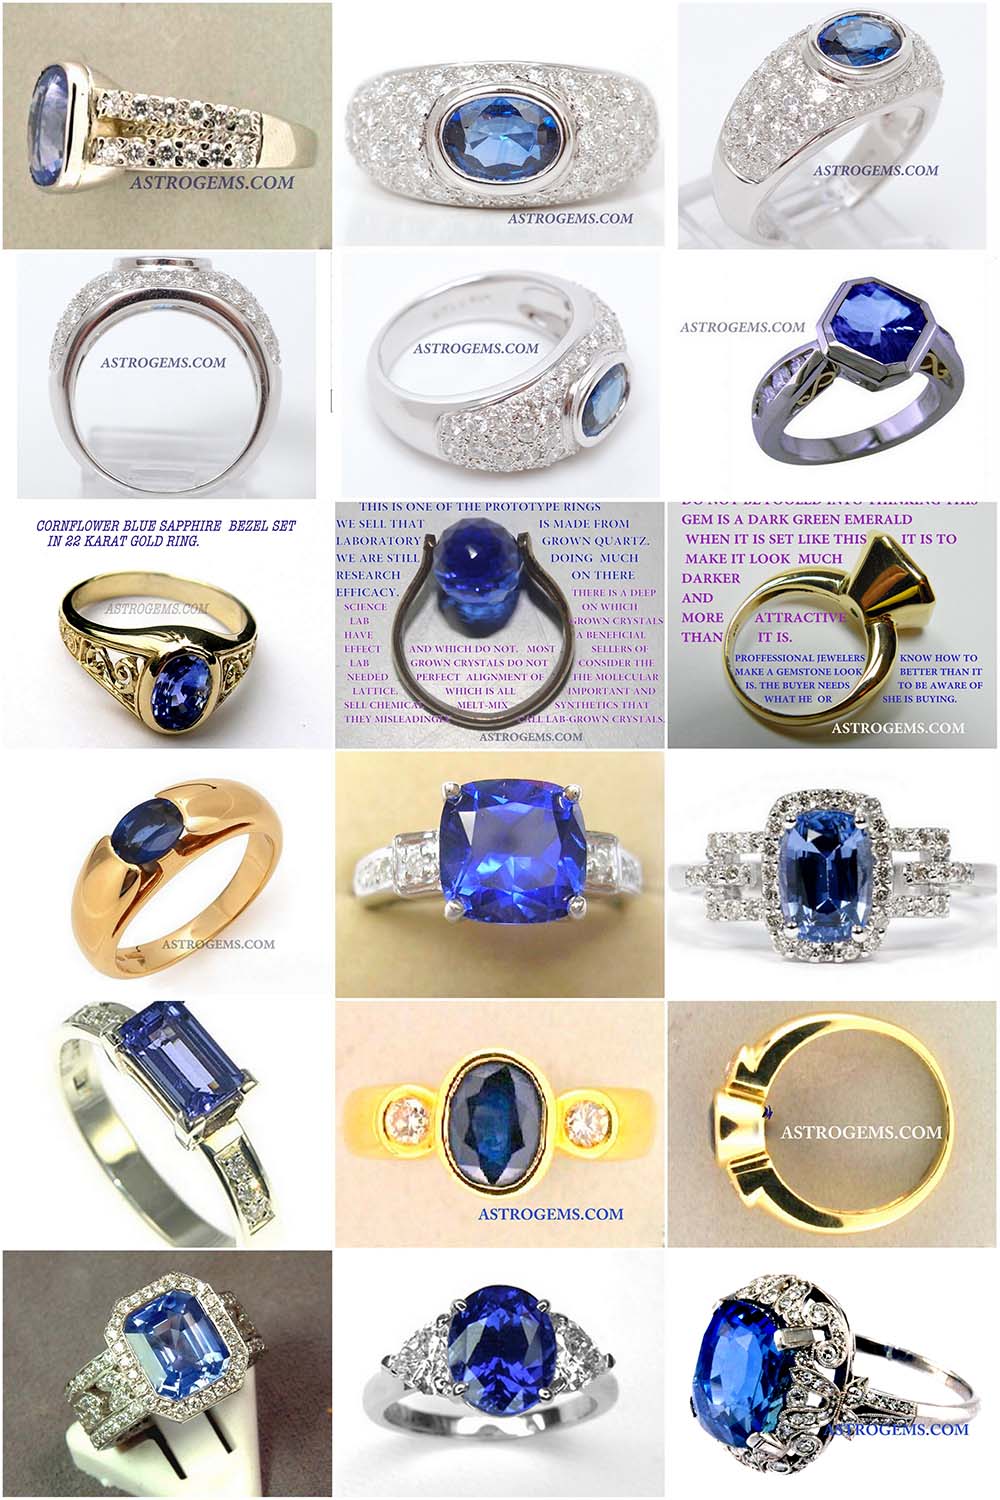 Astrogems can make any style of jyotish blue sapphire rings.